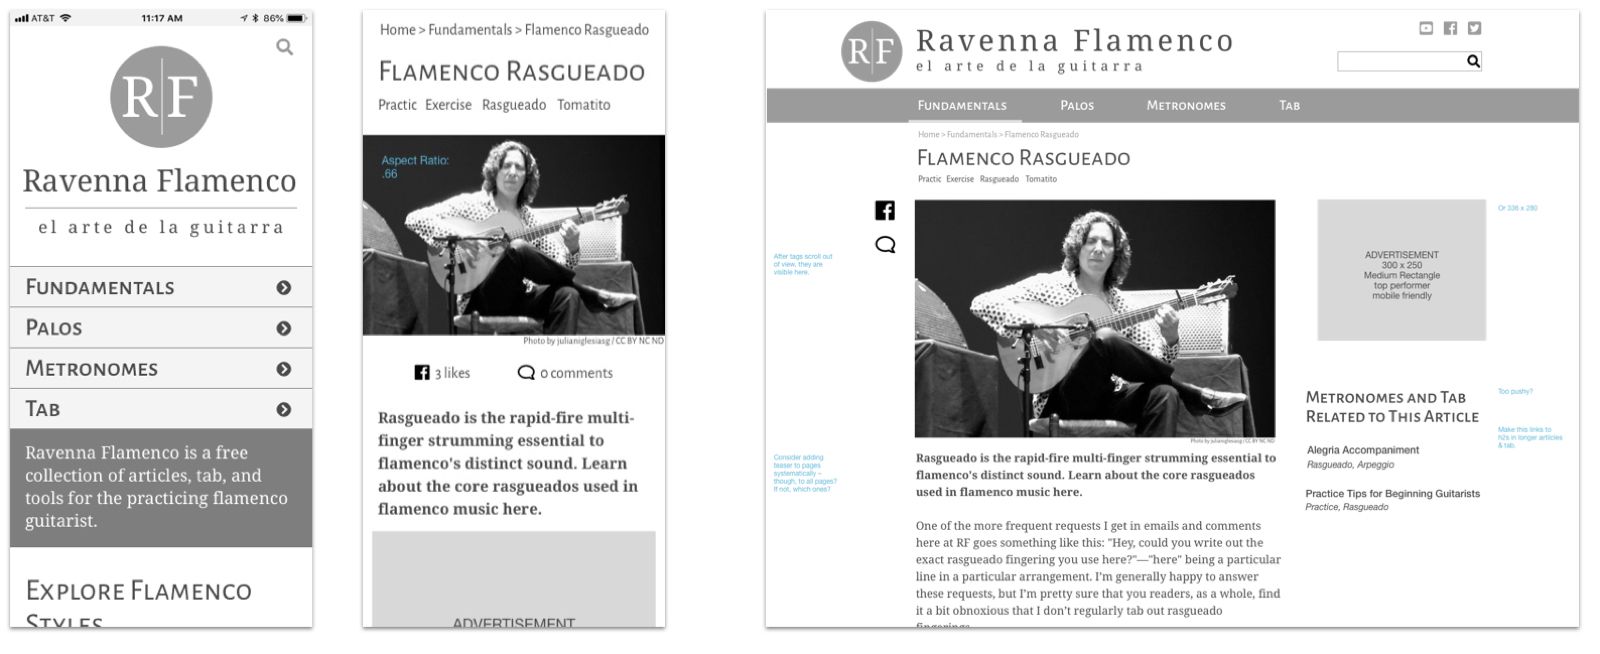 Wireframes of the redesigned Ravenna Flamenco site showing an article detail page